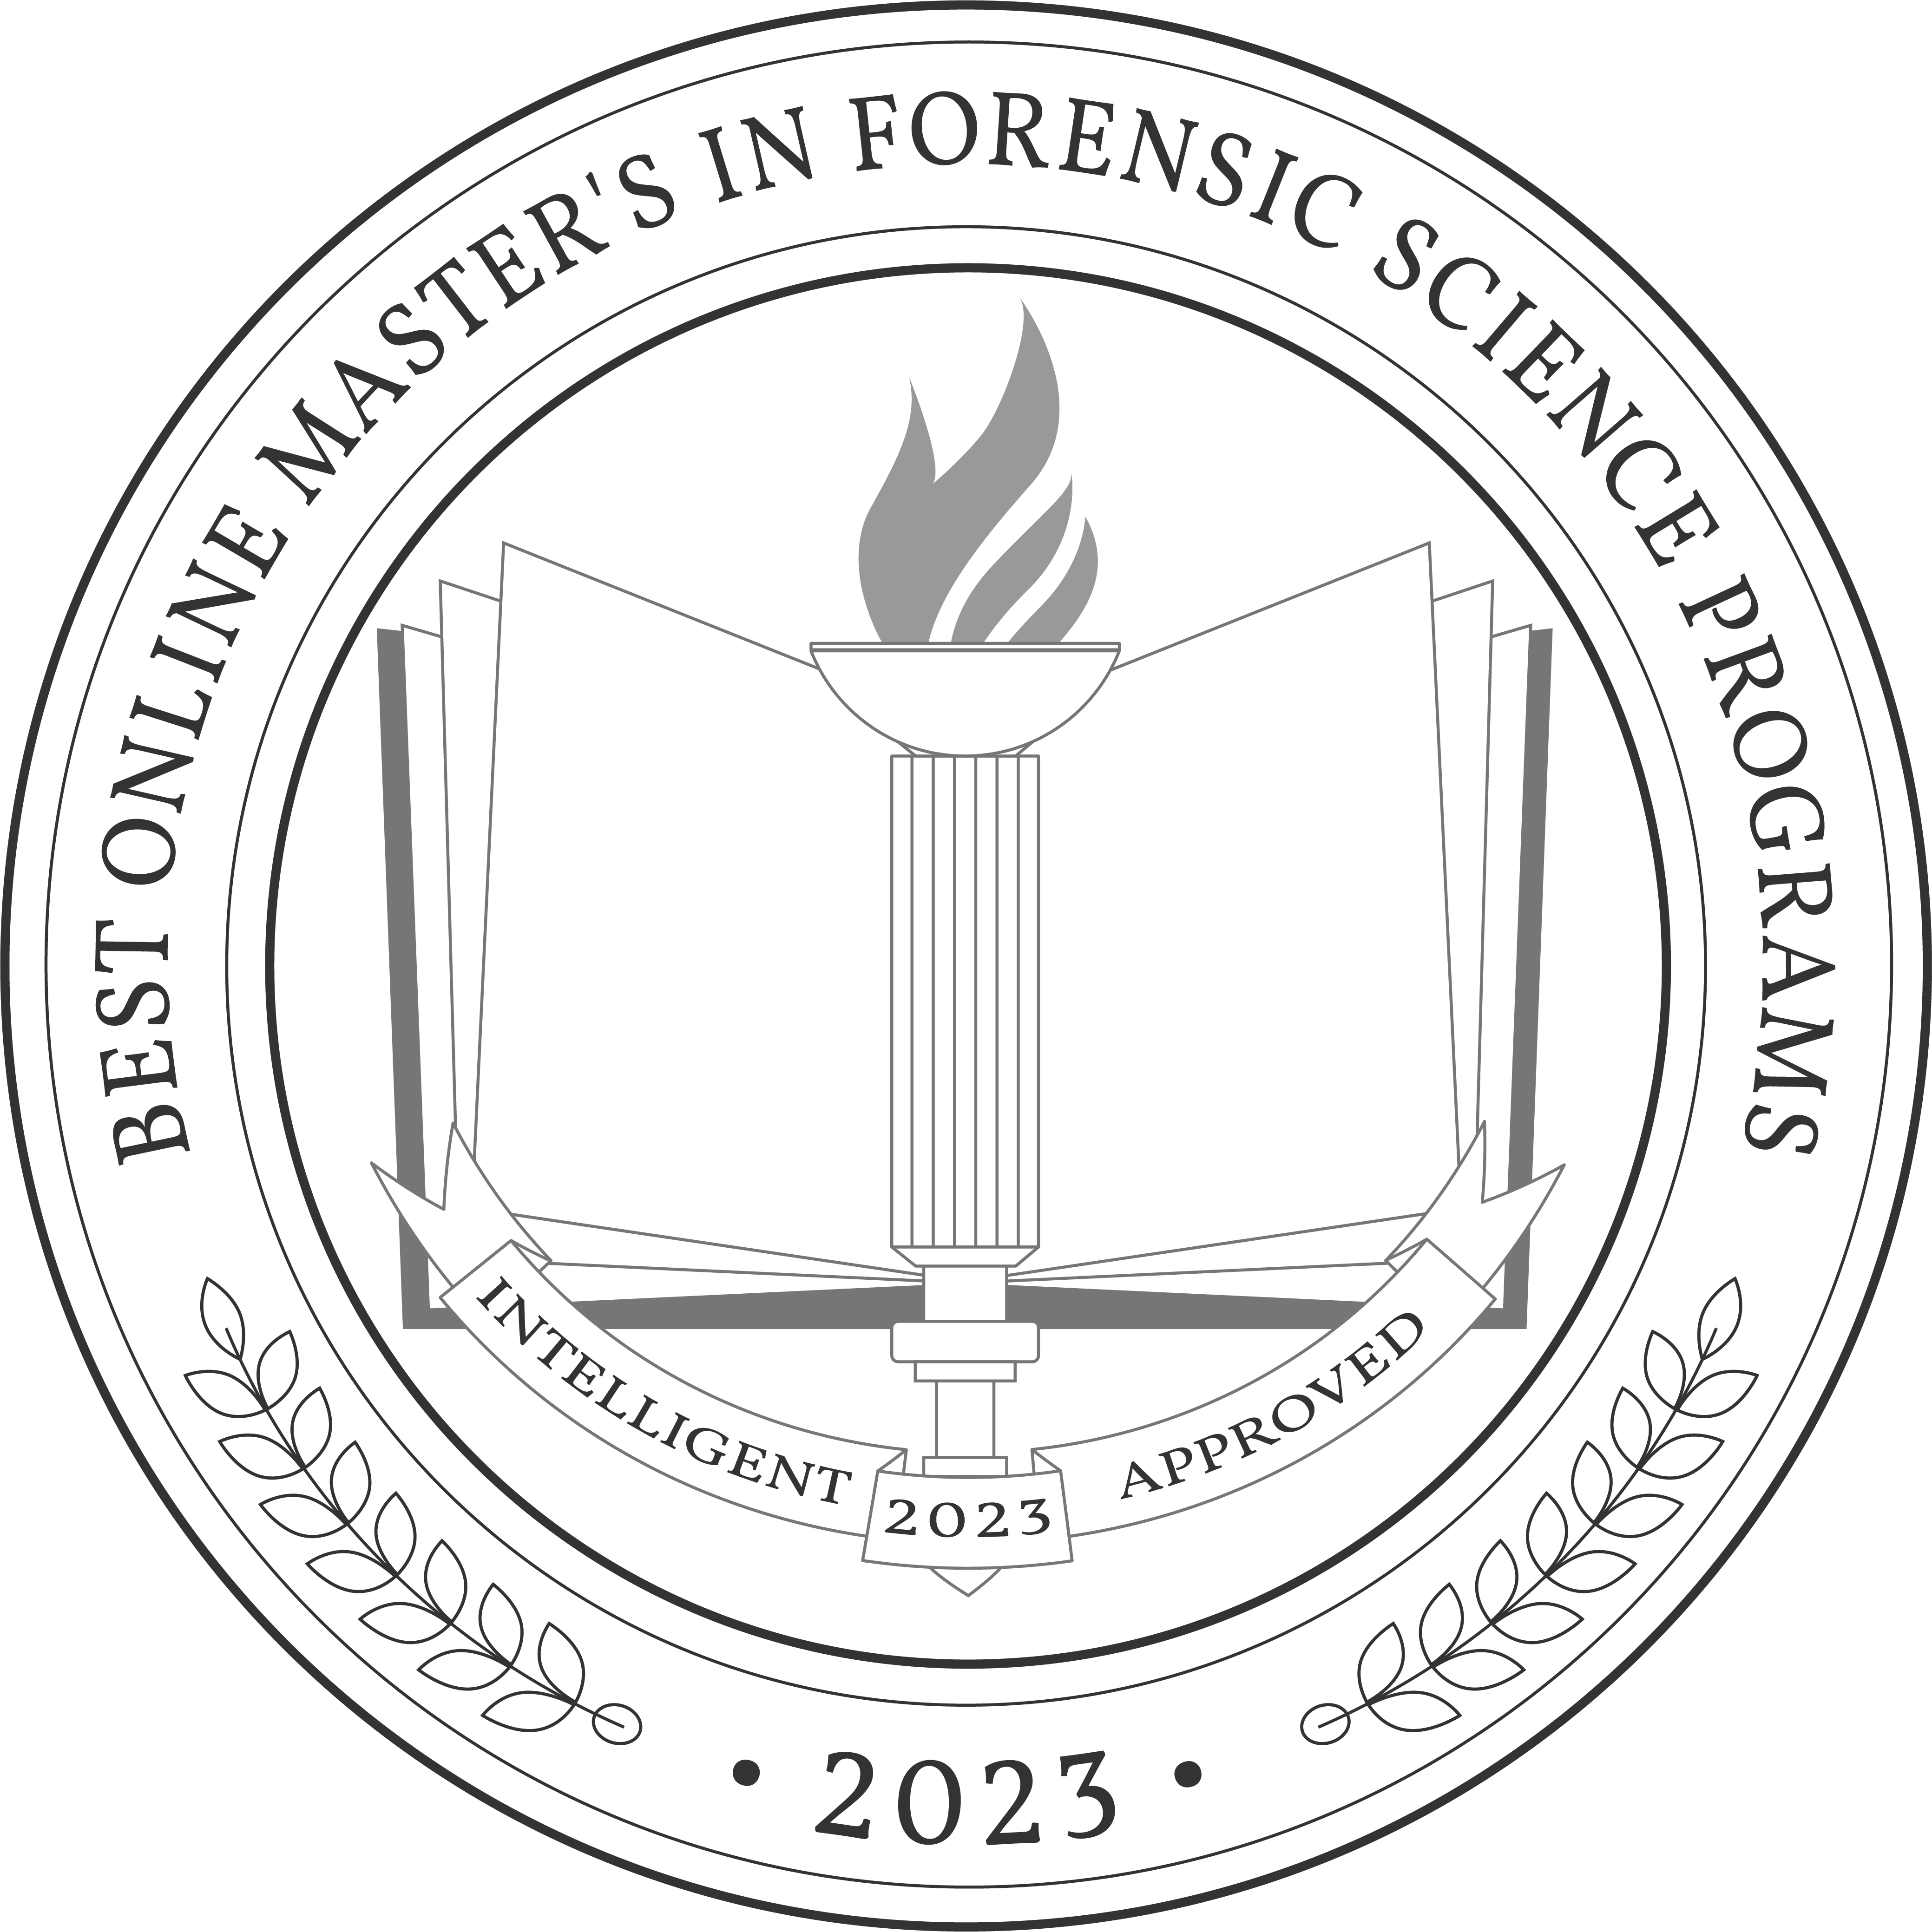 Best Online Master's in Forensic Science Degree Programs